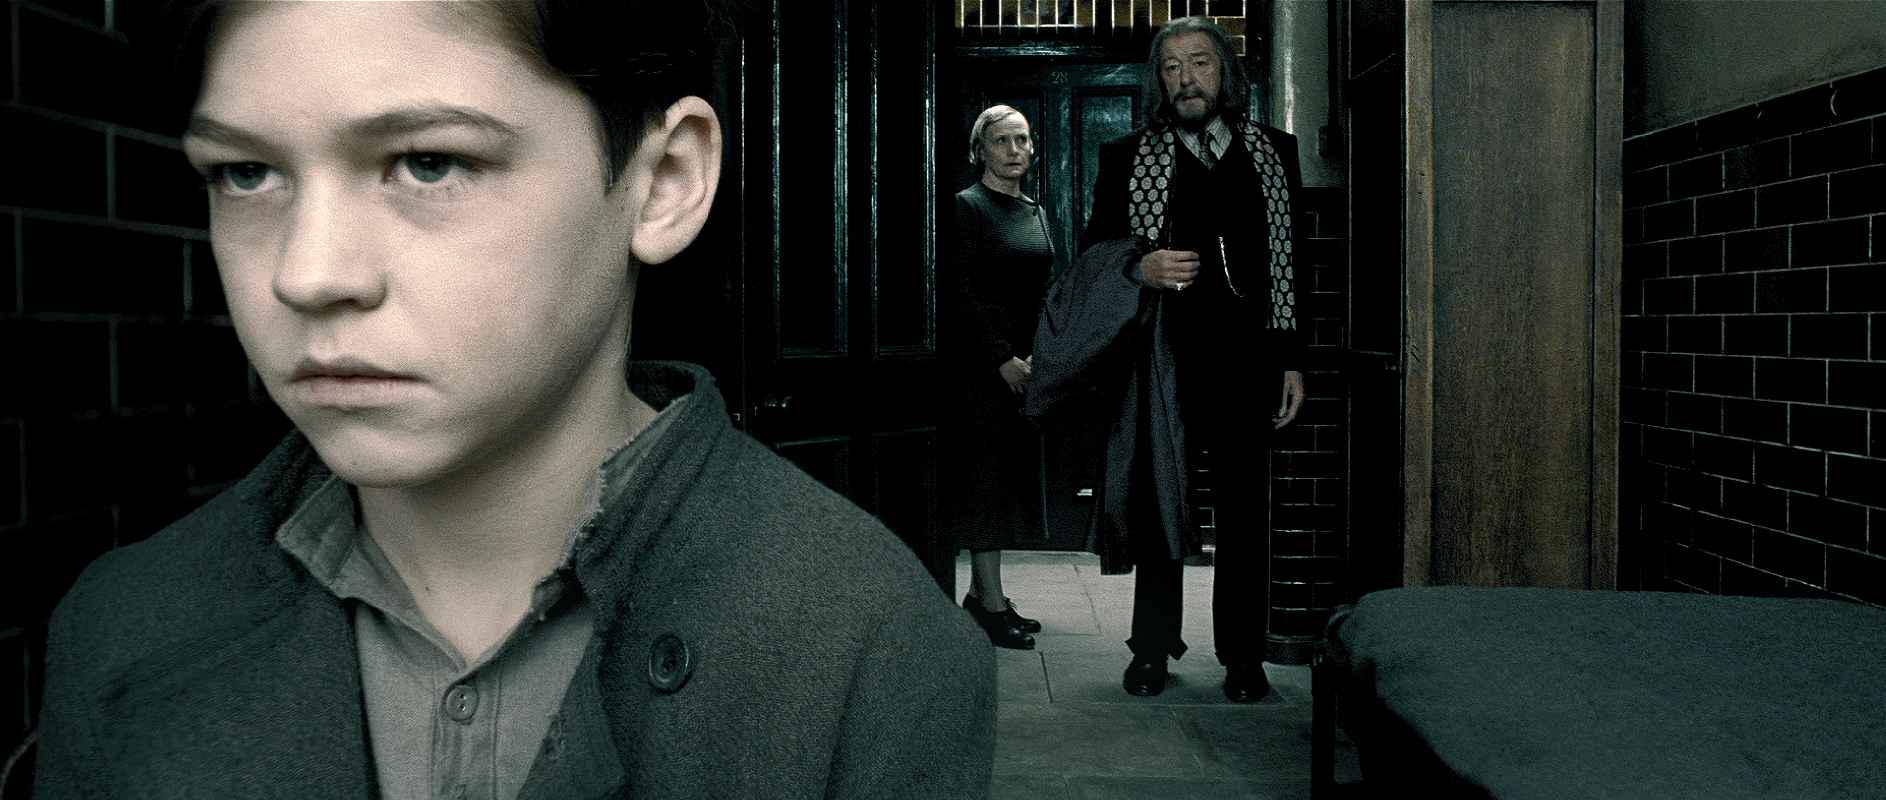 Hero Fiennes-Tiffin in Harry Potter and the Half-Blood Prince